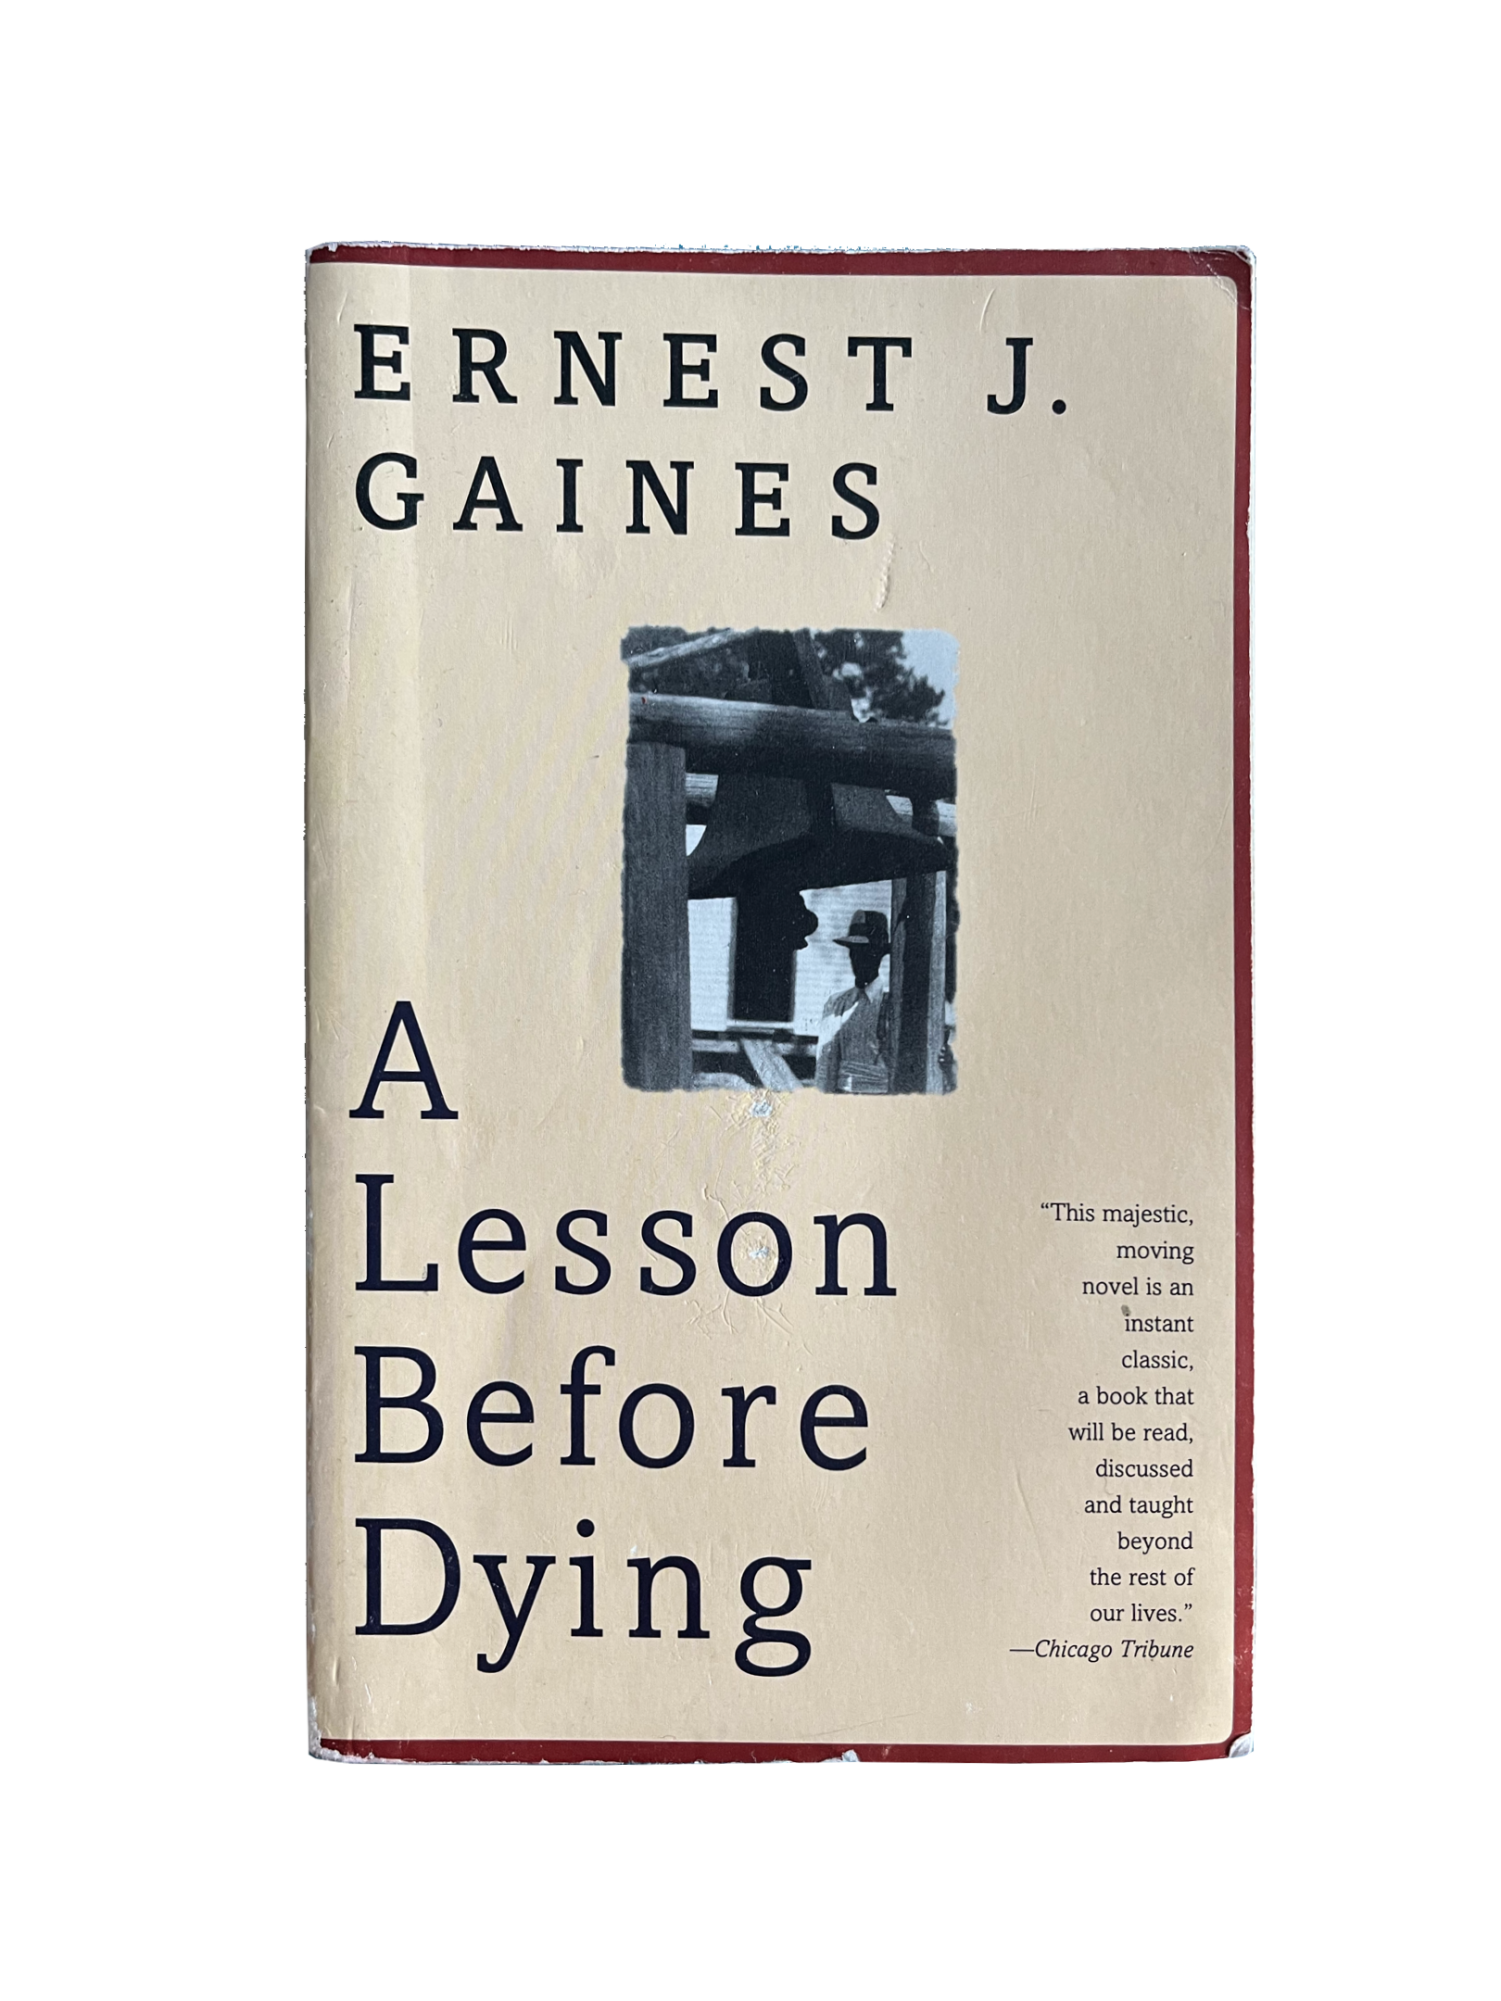 Through a fictional storyline A Lesson Before Dying allows the reader to explore heavy topics around race and identity. The book reflects a similar climate to that of the early 1900s in the South.